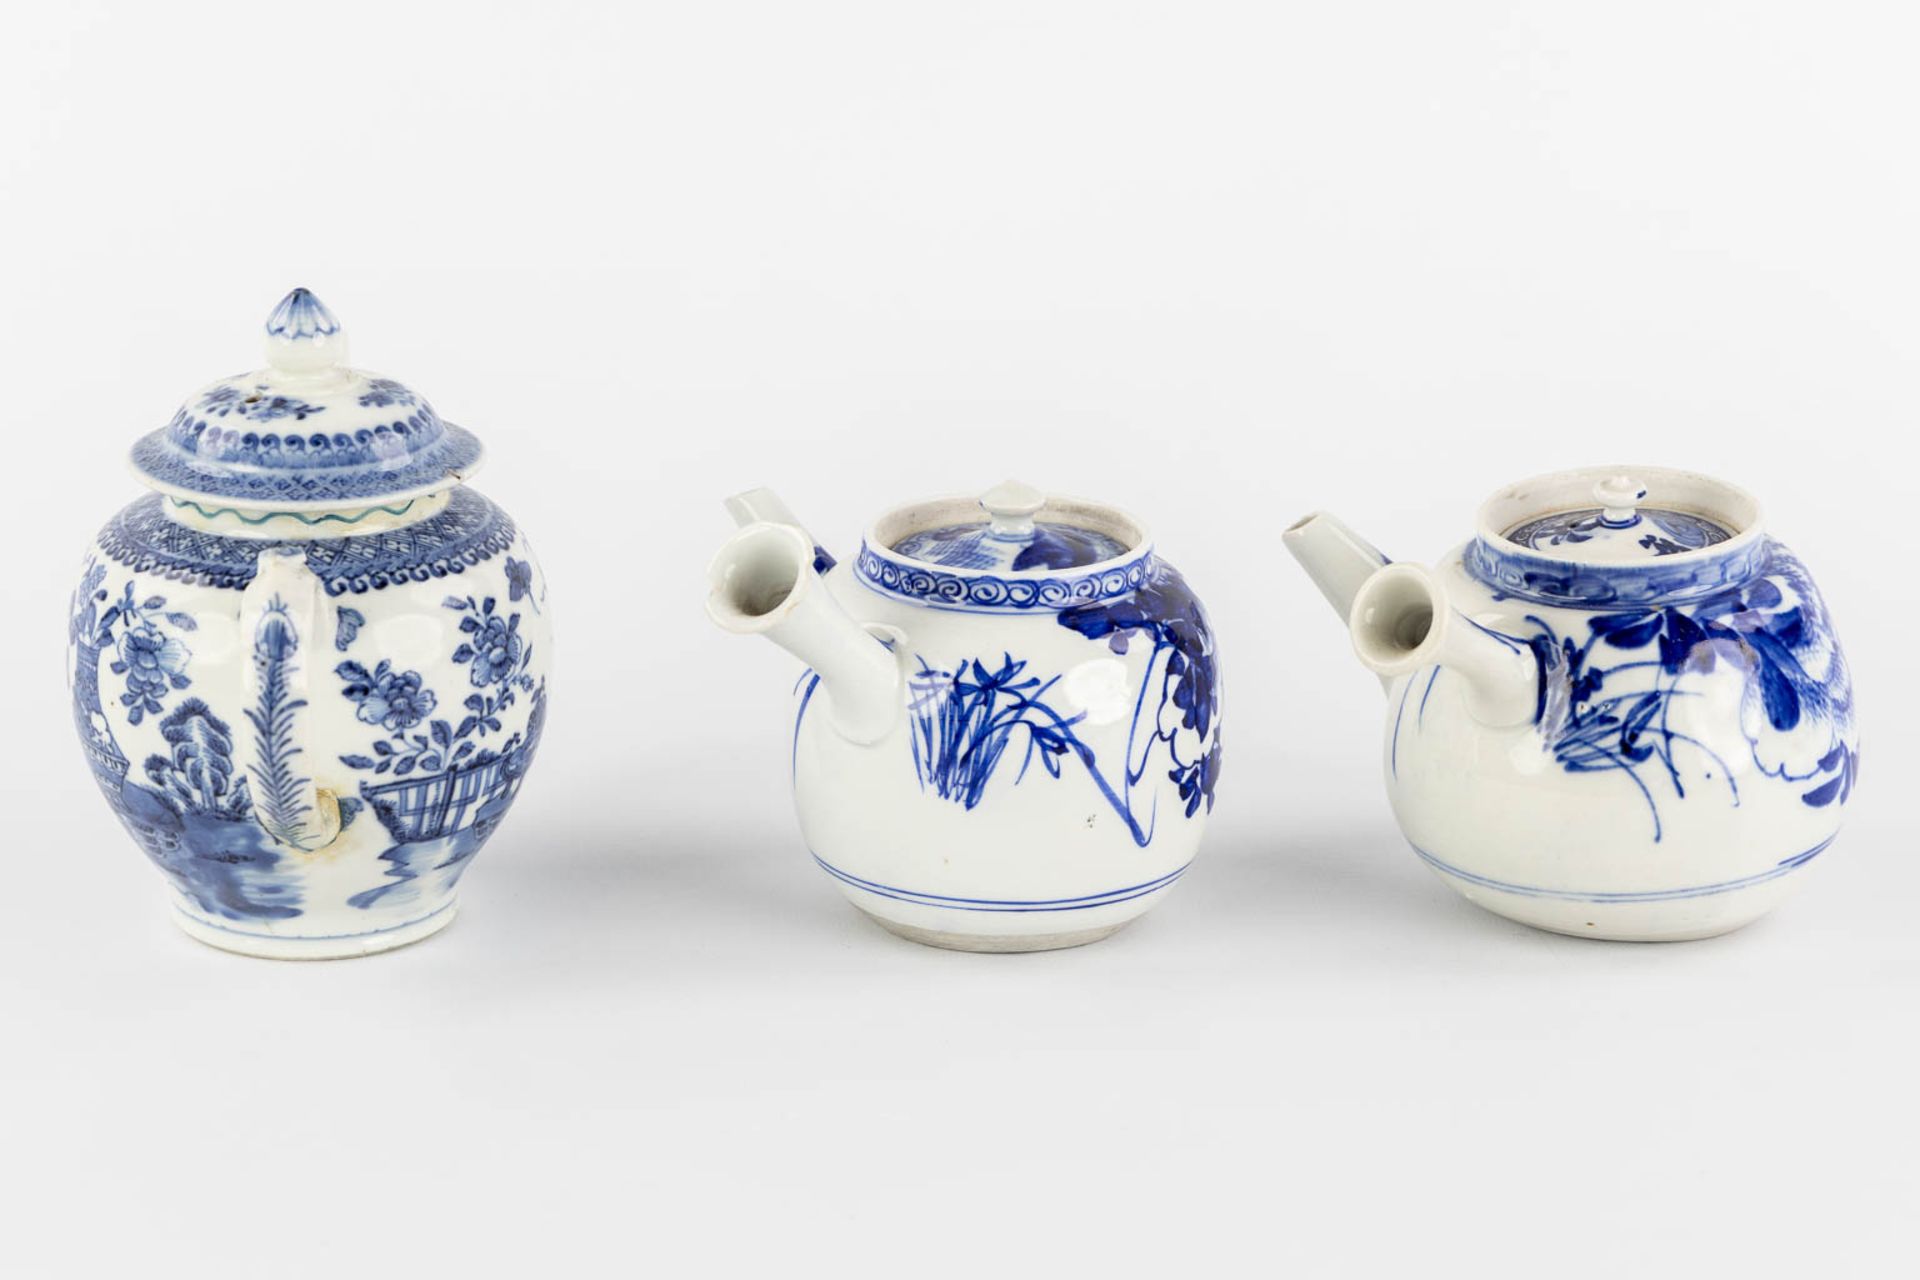 Three Chinese and Japanese teapots, blue-white decor. (W:20 x H:14 cm) - Image 4 of 17